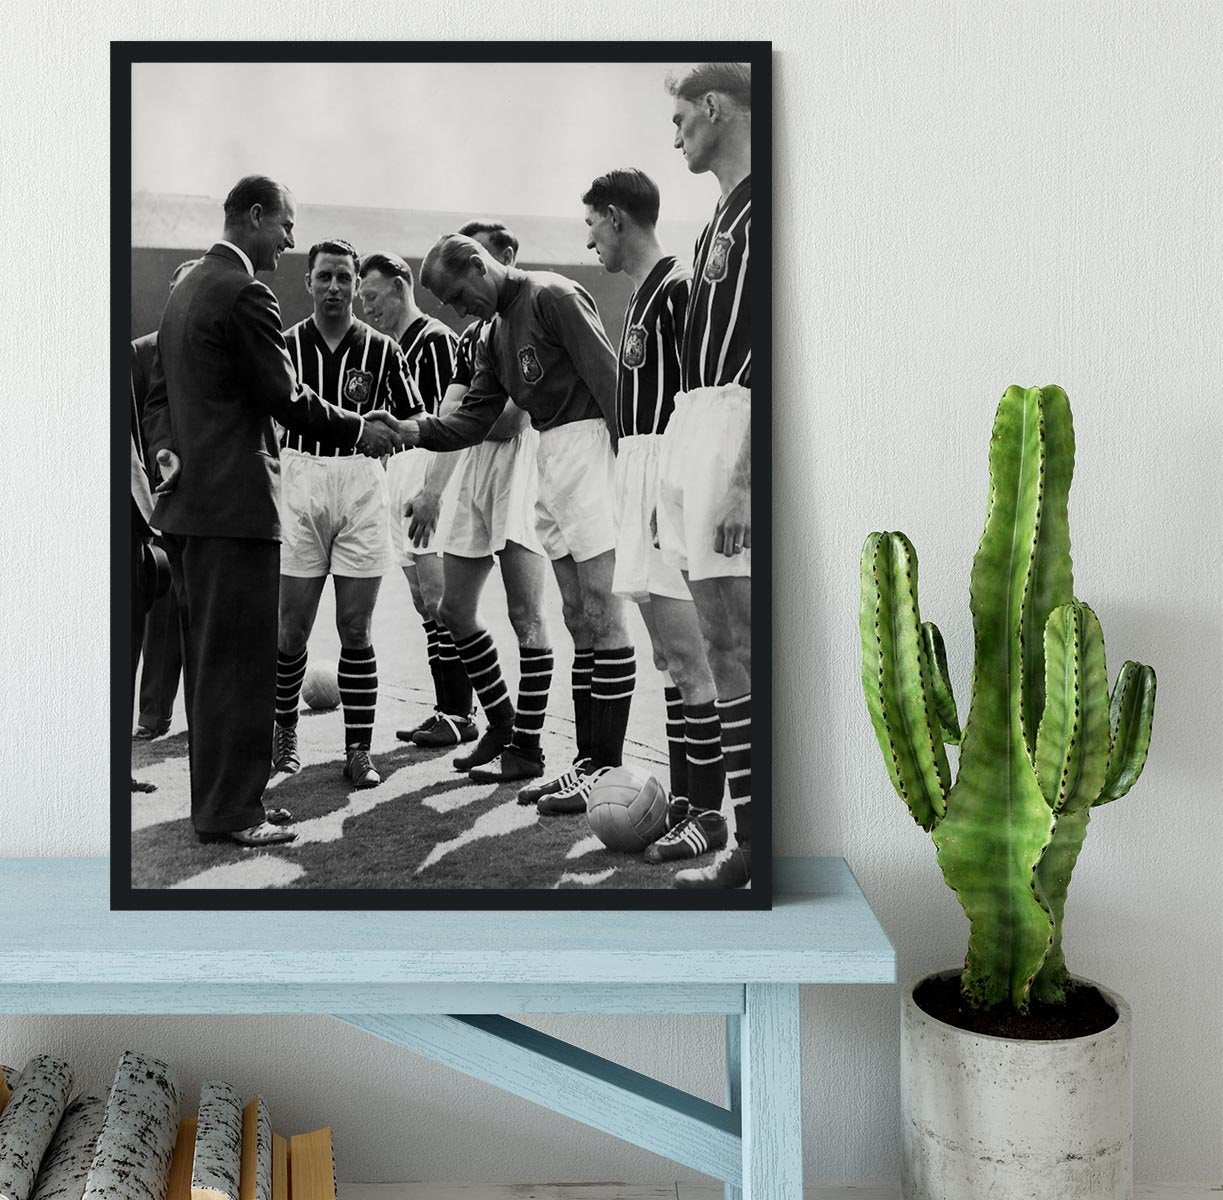 Prince Philip meeting members of Manchester City team Framed Print - Canvas Art Rocks - 2